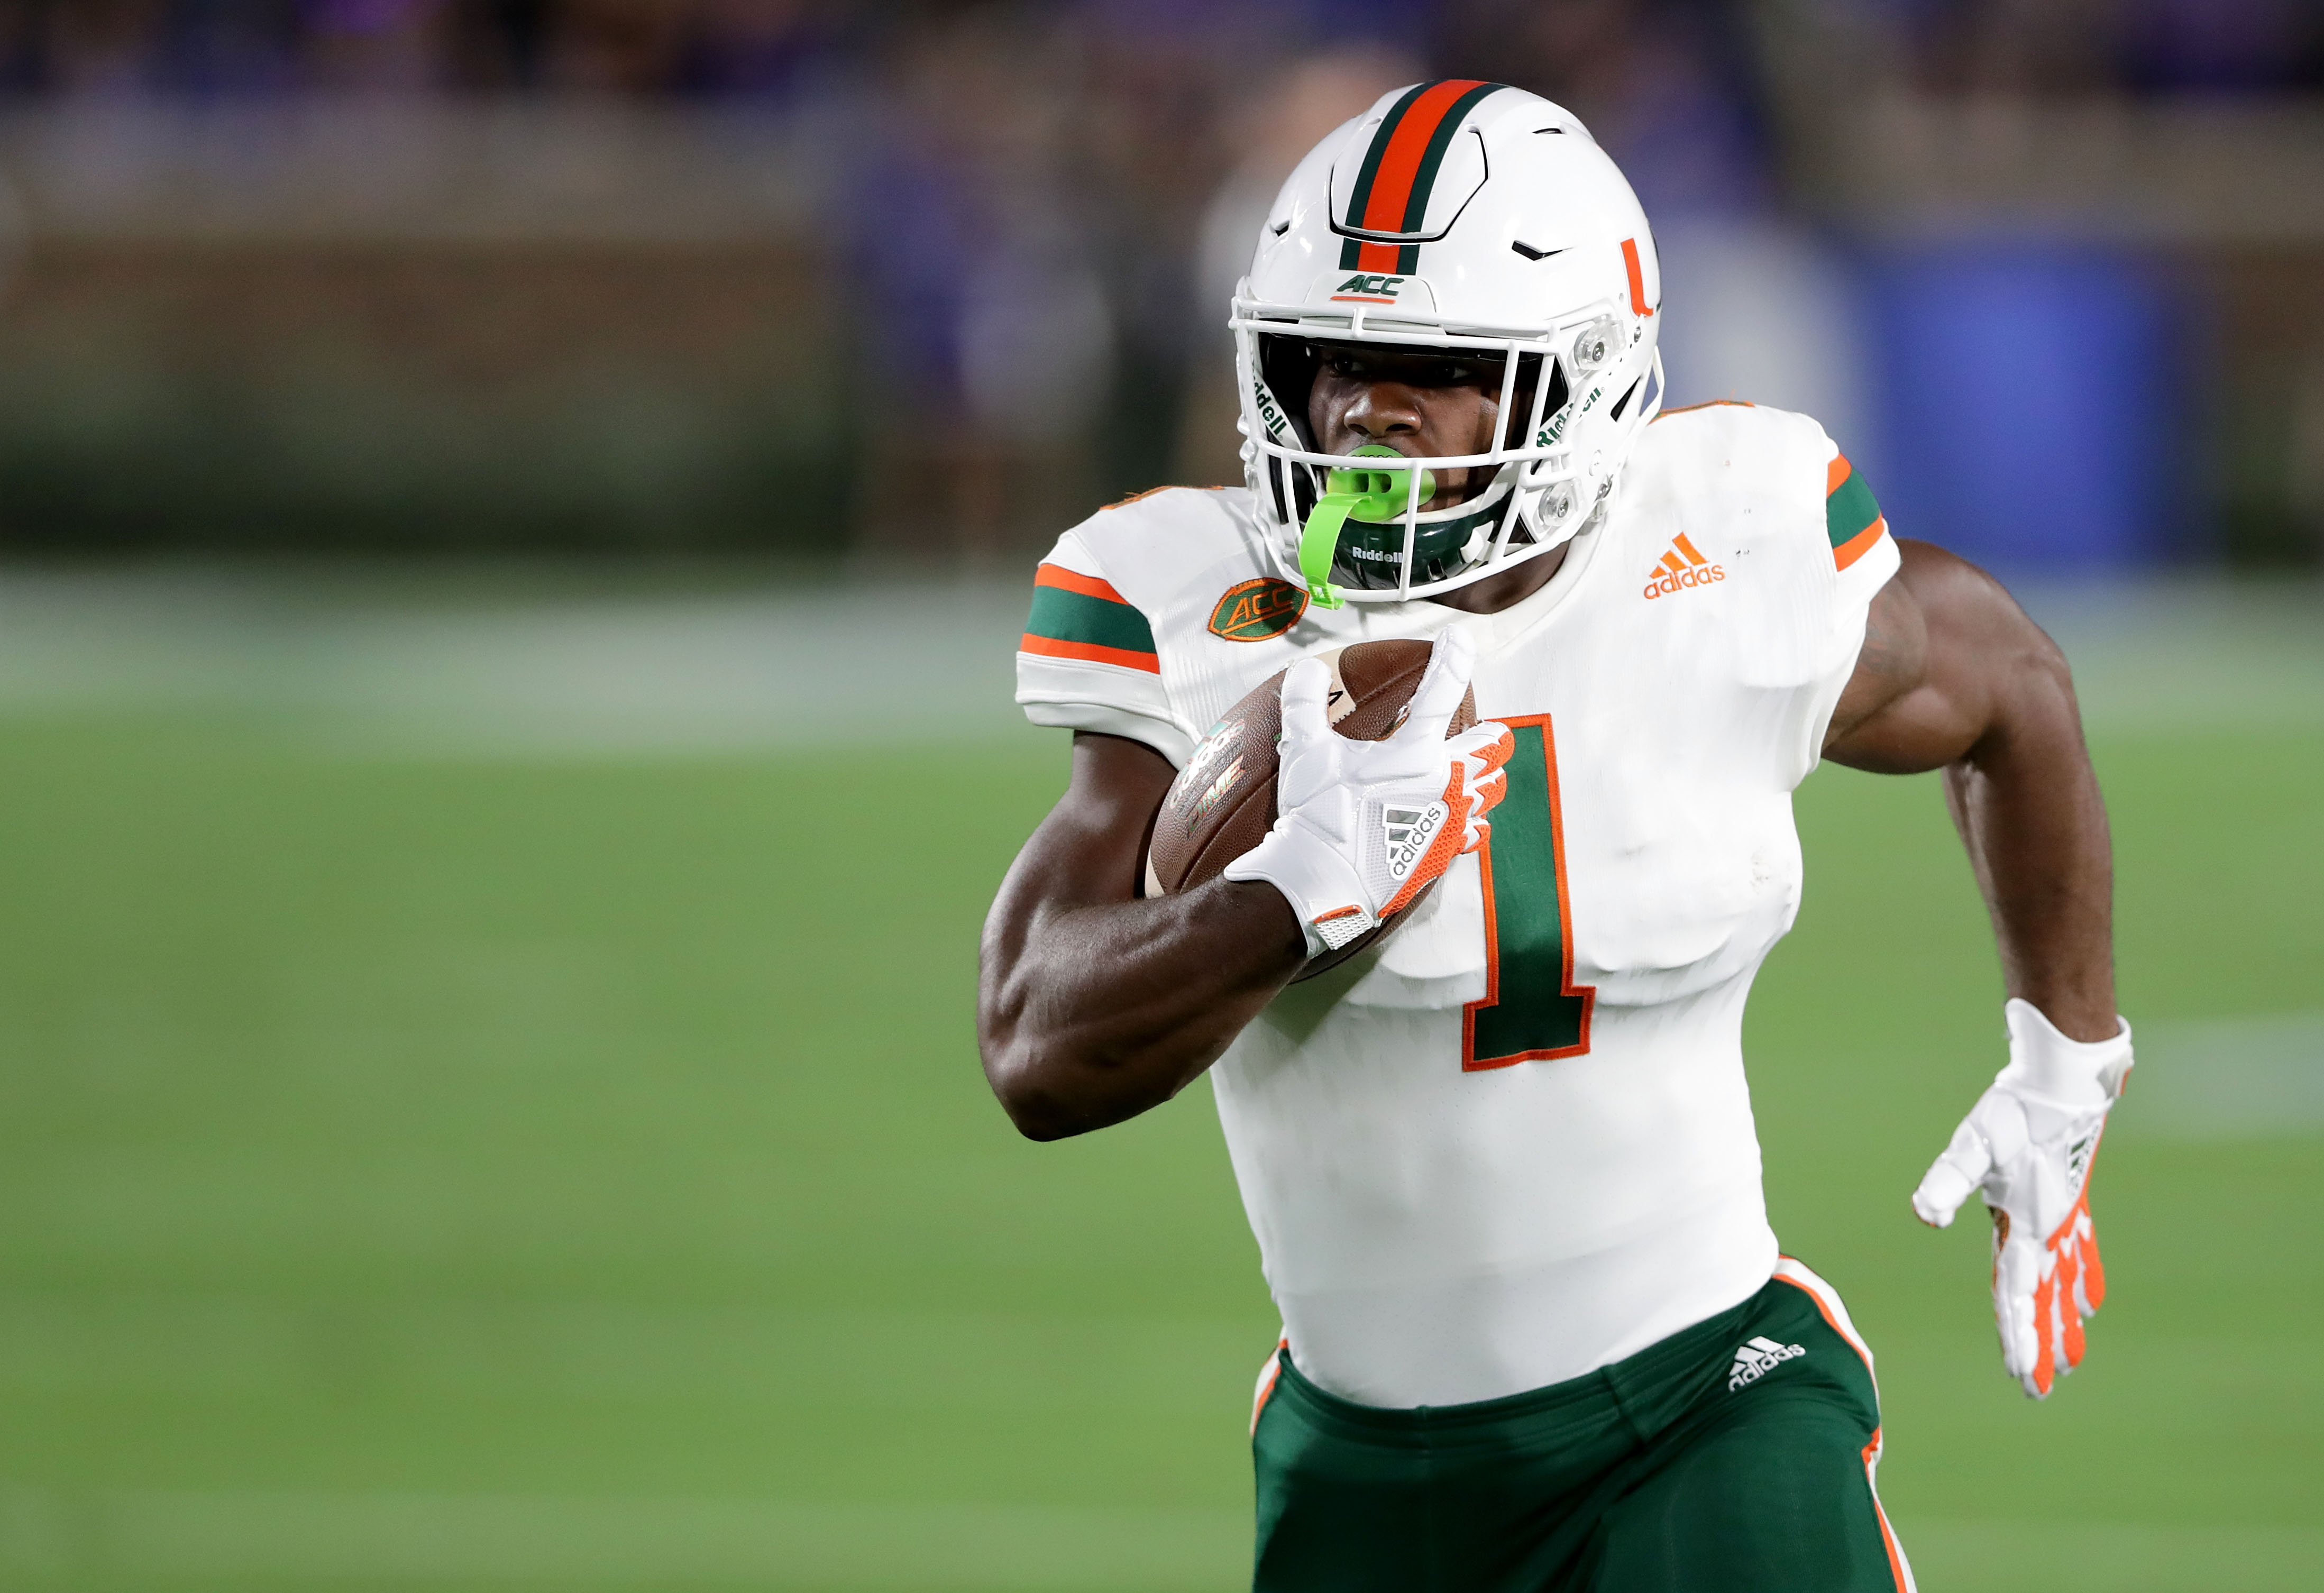 Former Miami Hurricanes RB Mark Walton gets second chance with Dolphins